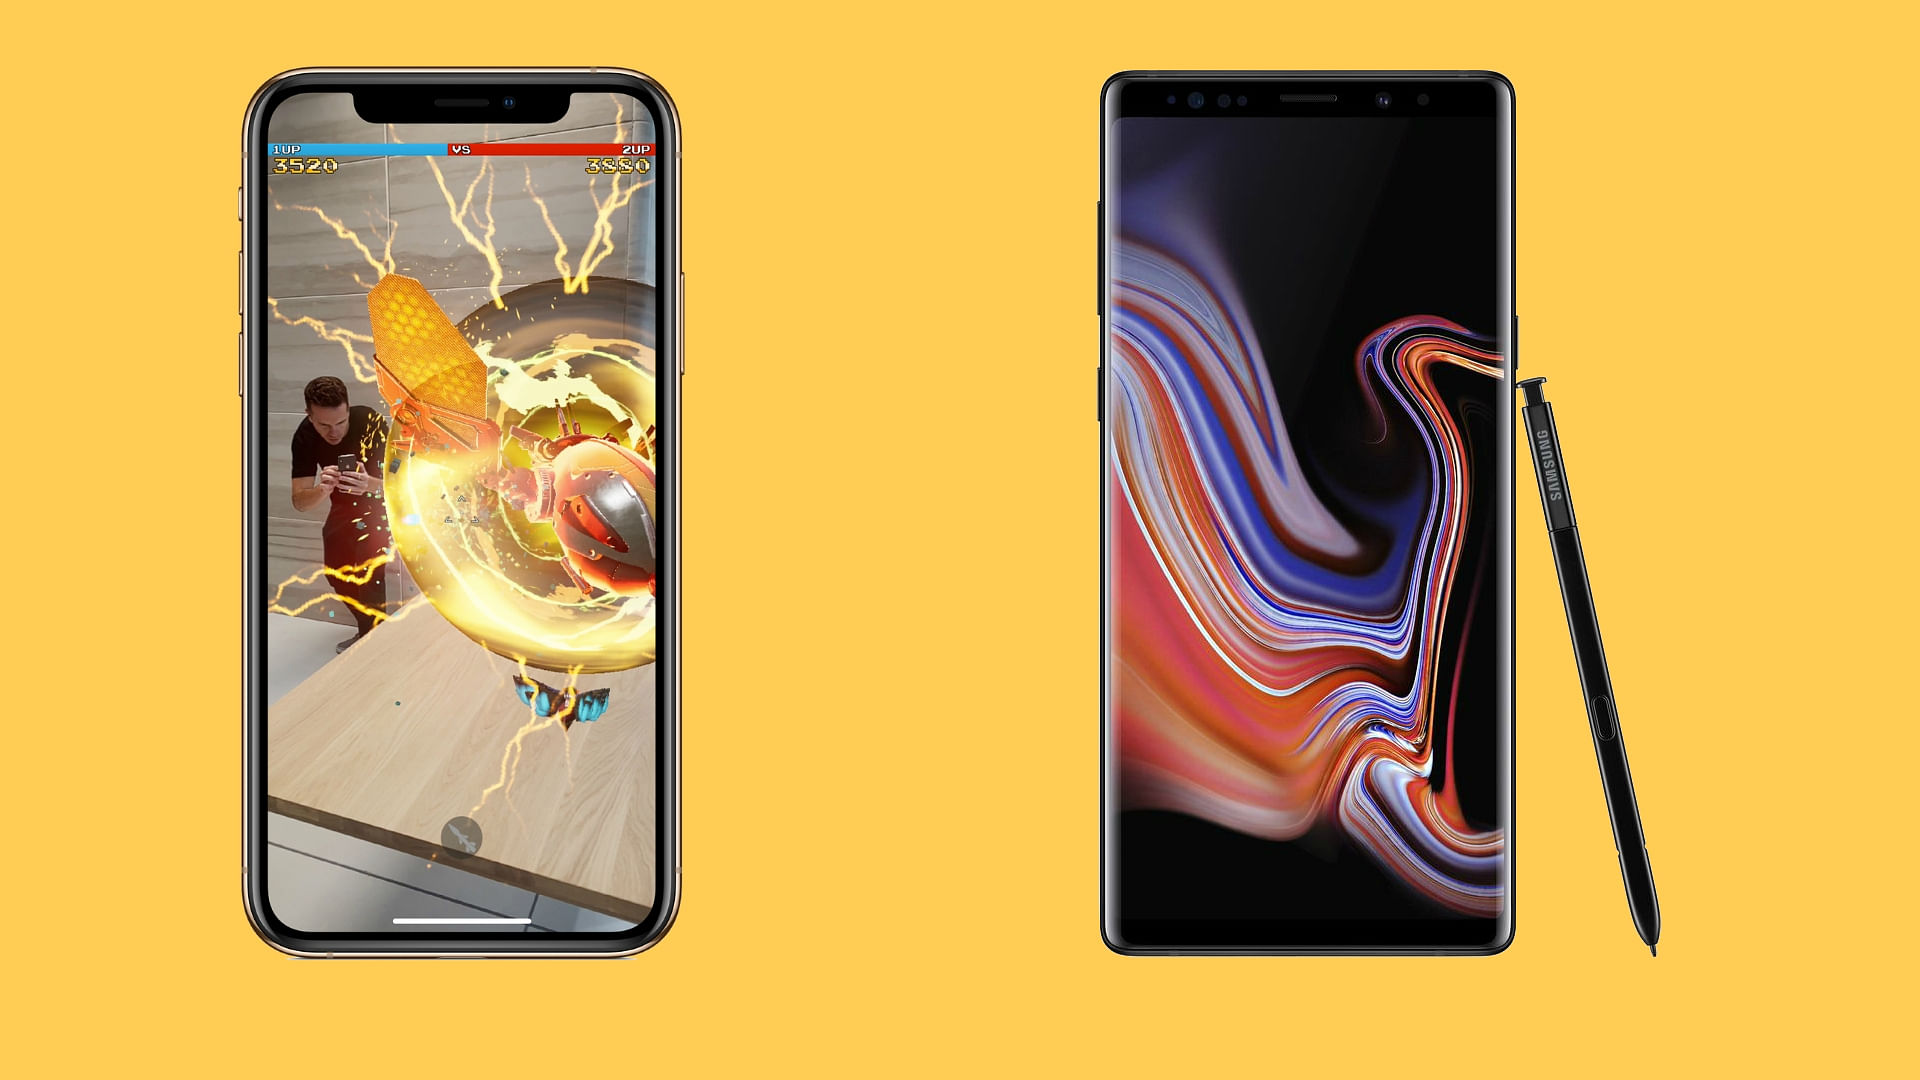 Apple iPhone XS Max (left) and Samsung Galaxy Note 9 (right)